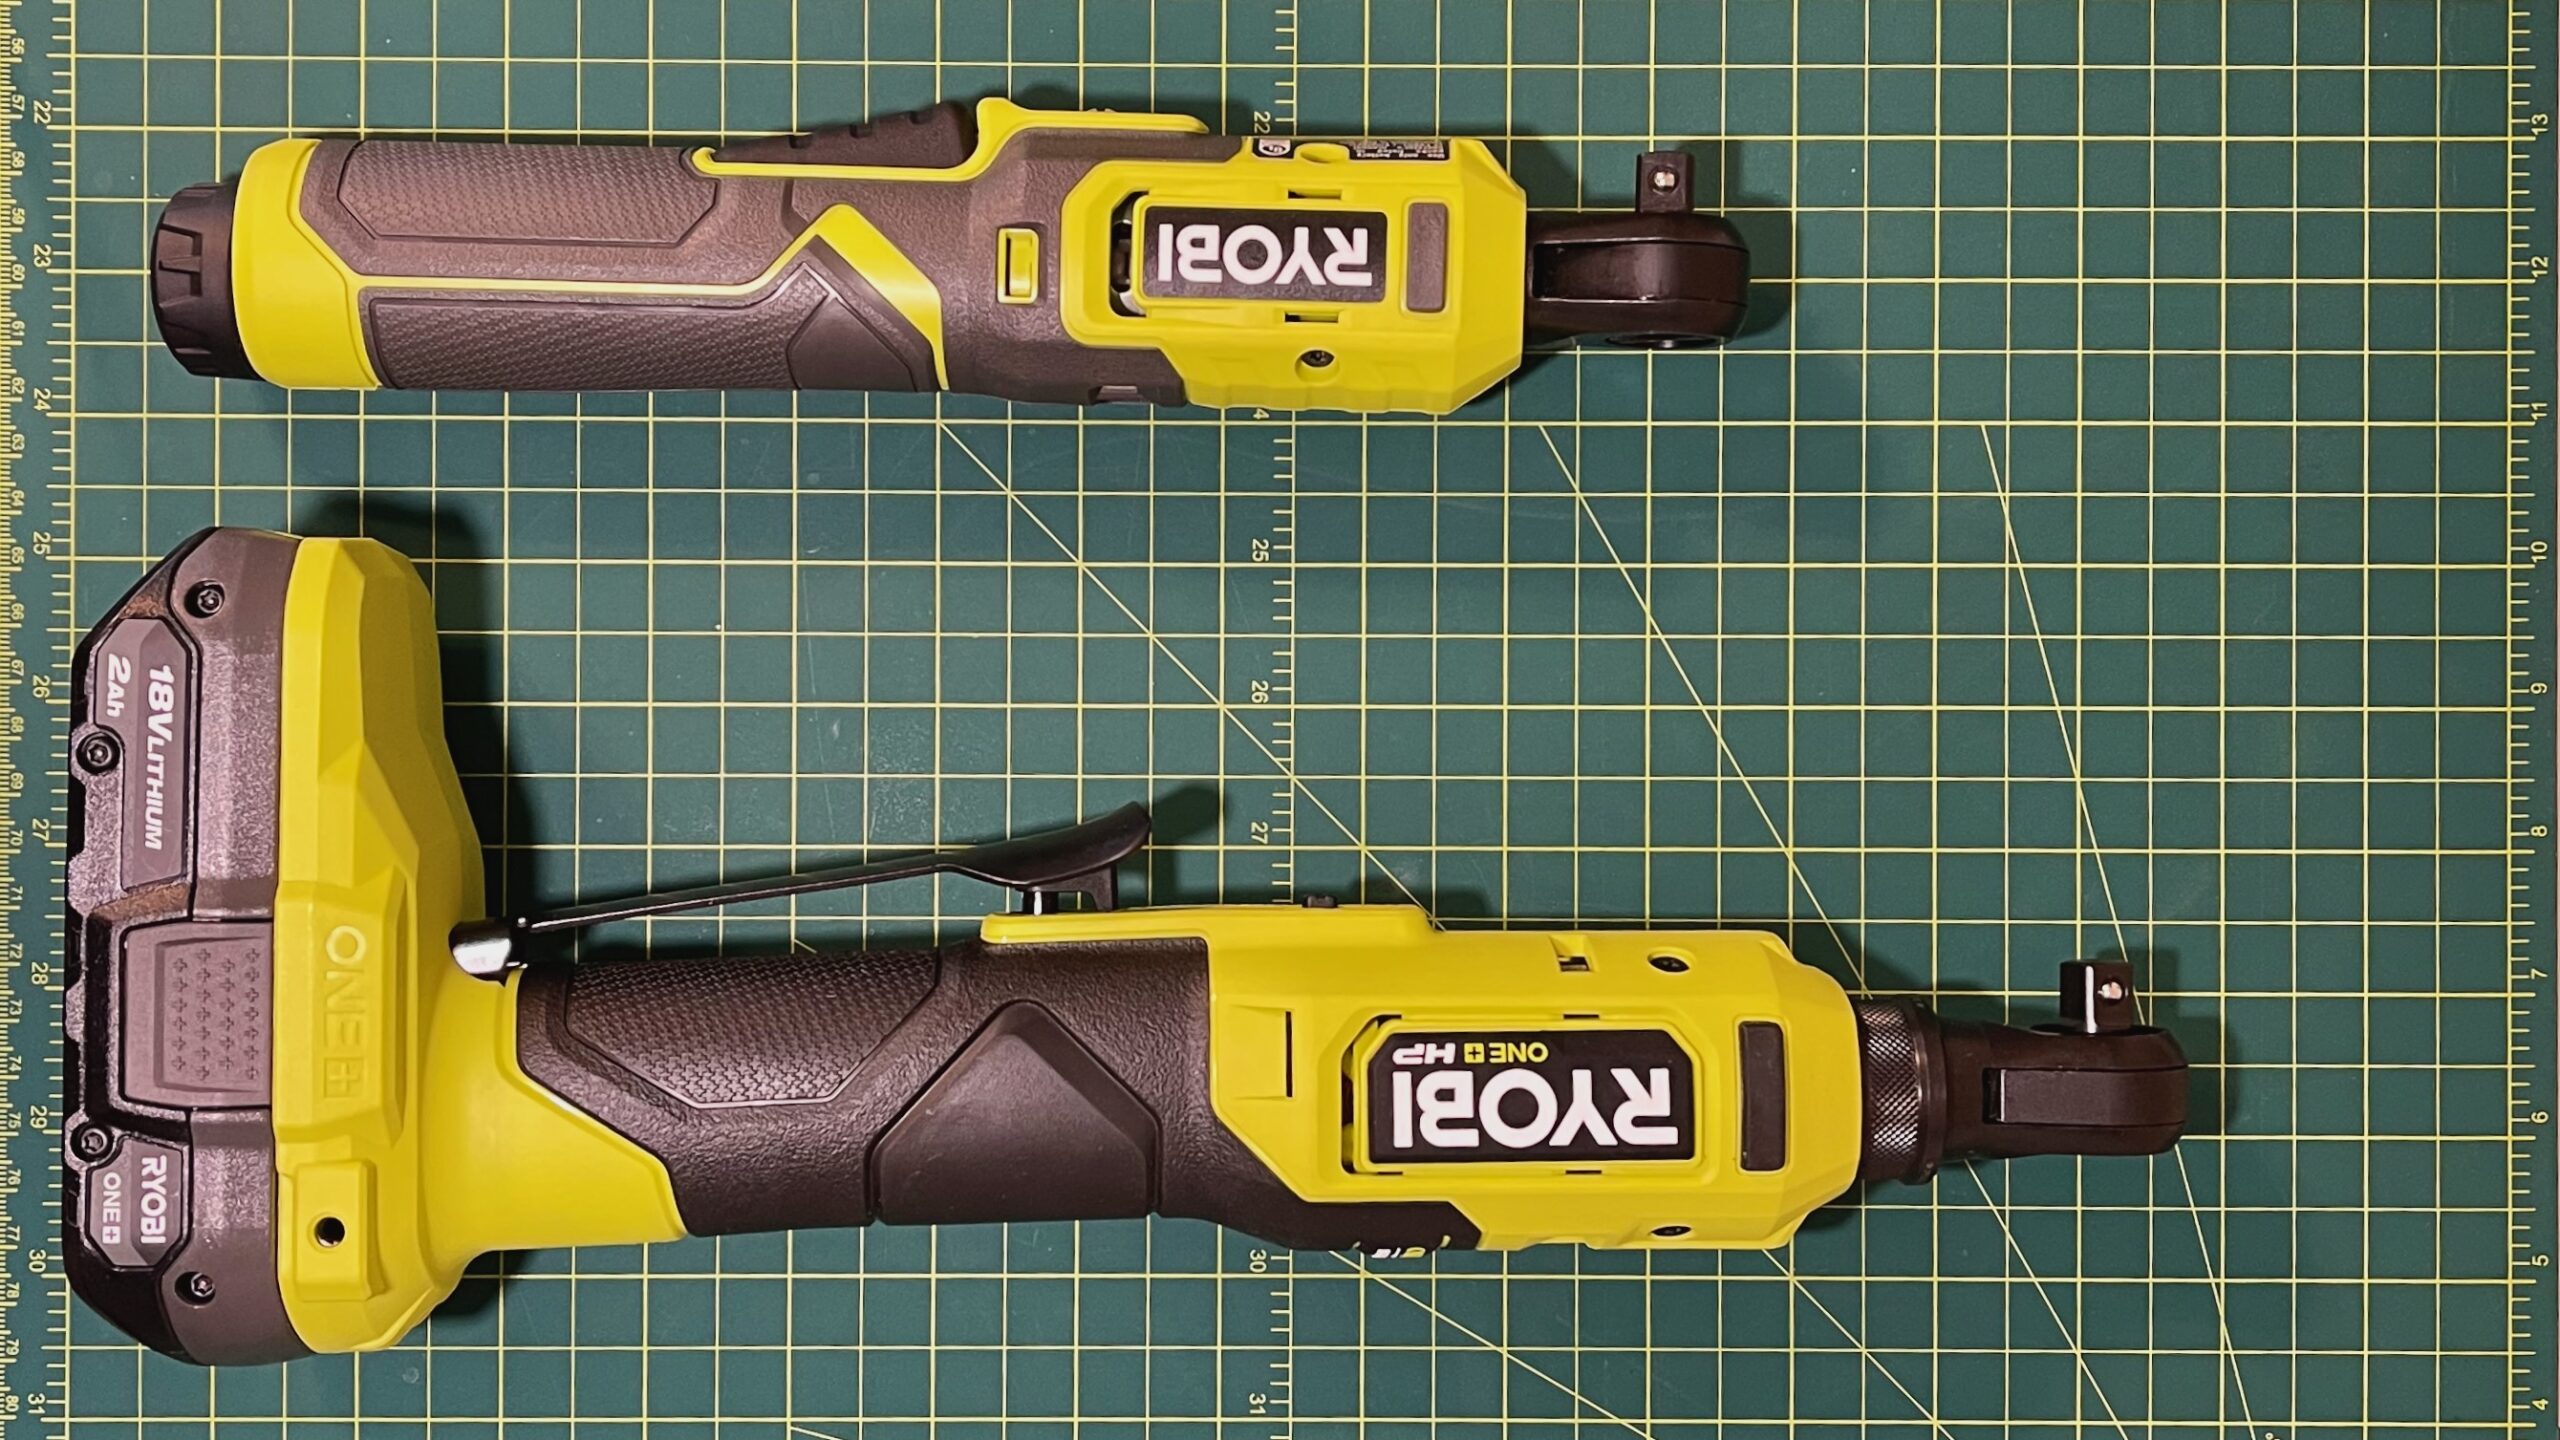 NEW RYOBI USB Lithium Cordless Ratchets Foam Cutter, and MORE